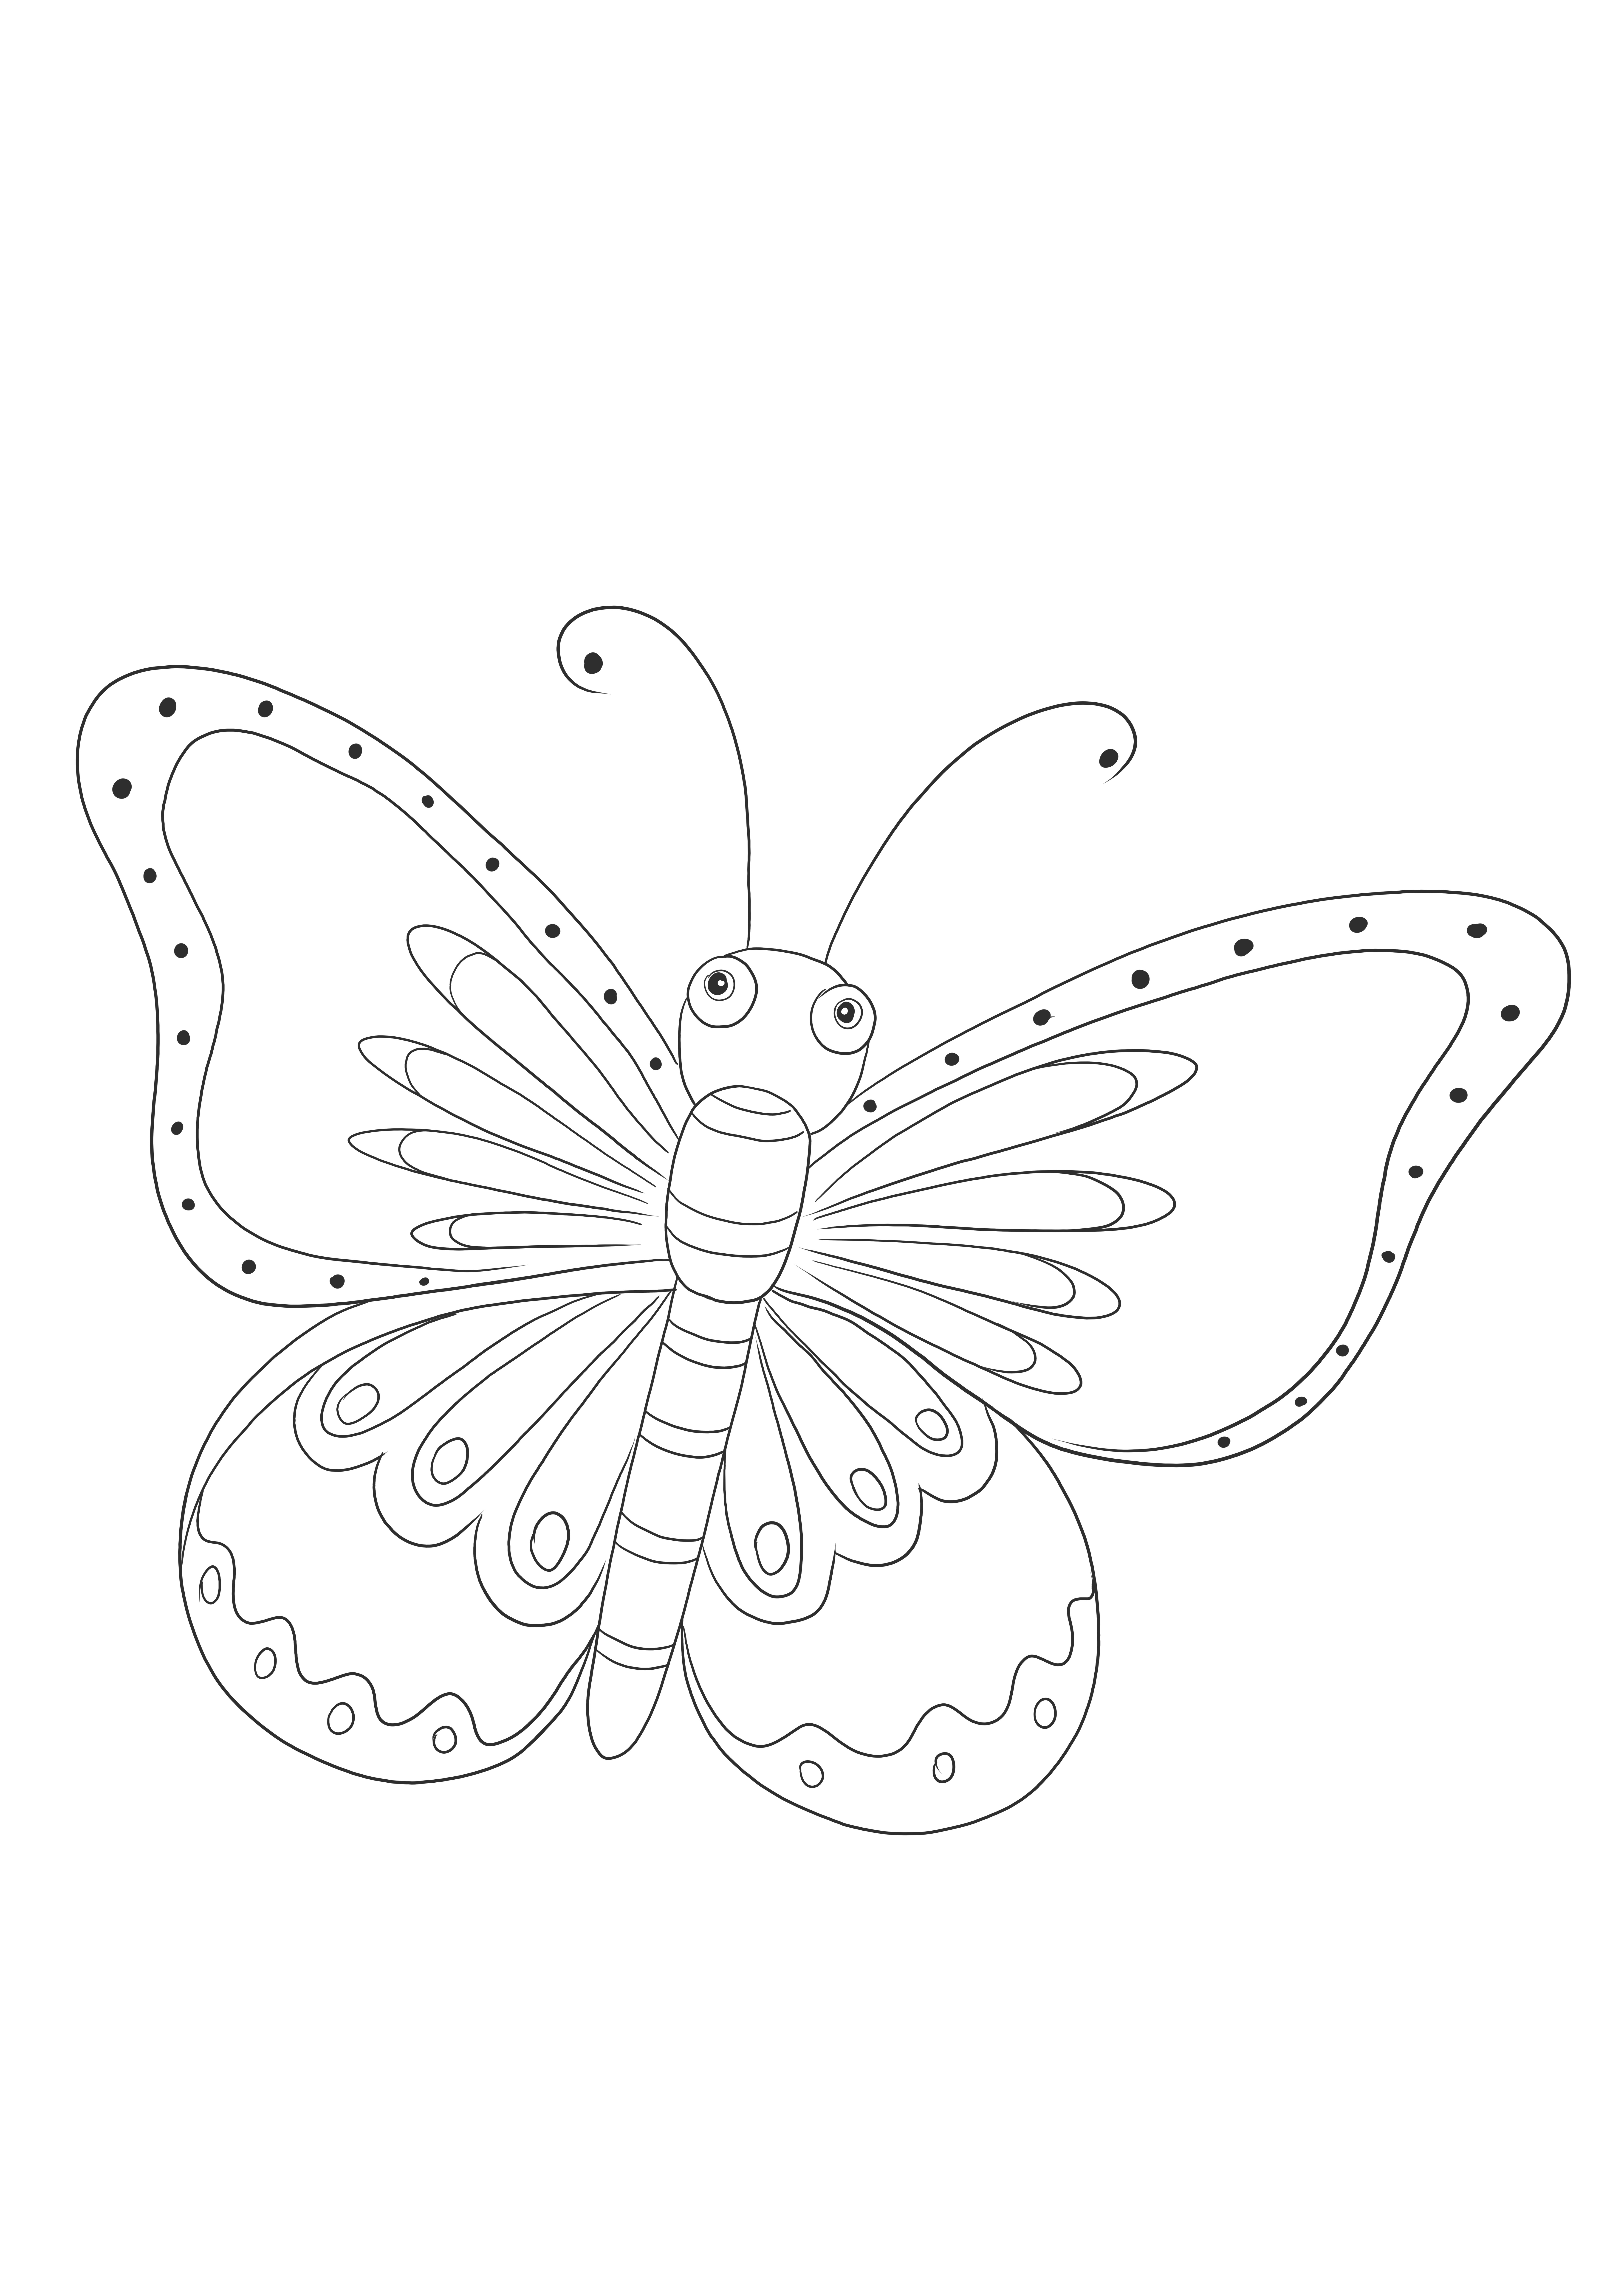 Butterfly emoji easy to color and download for free